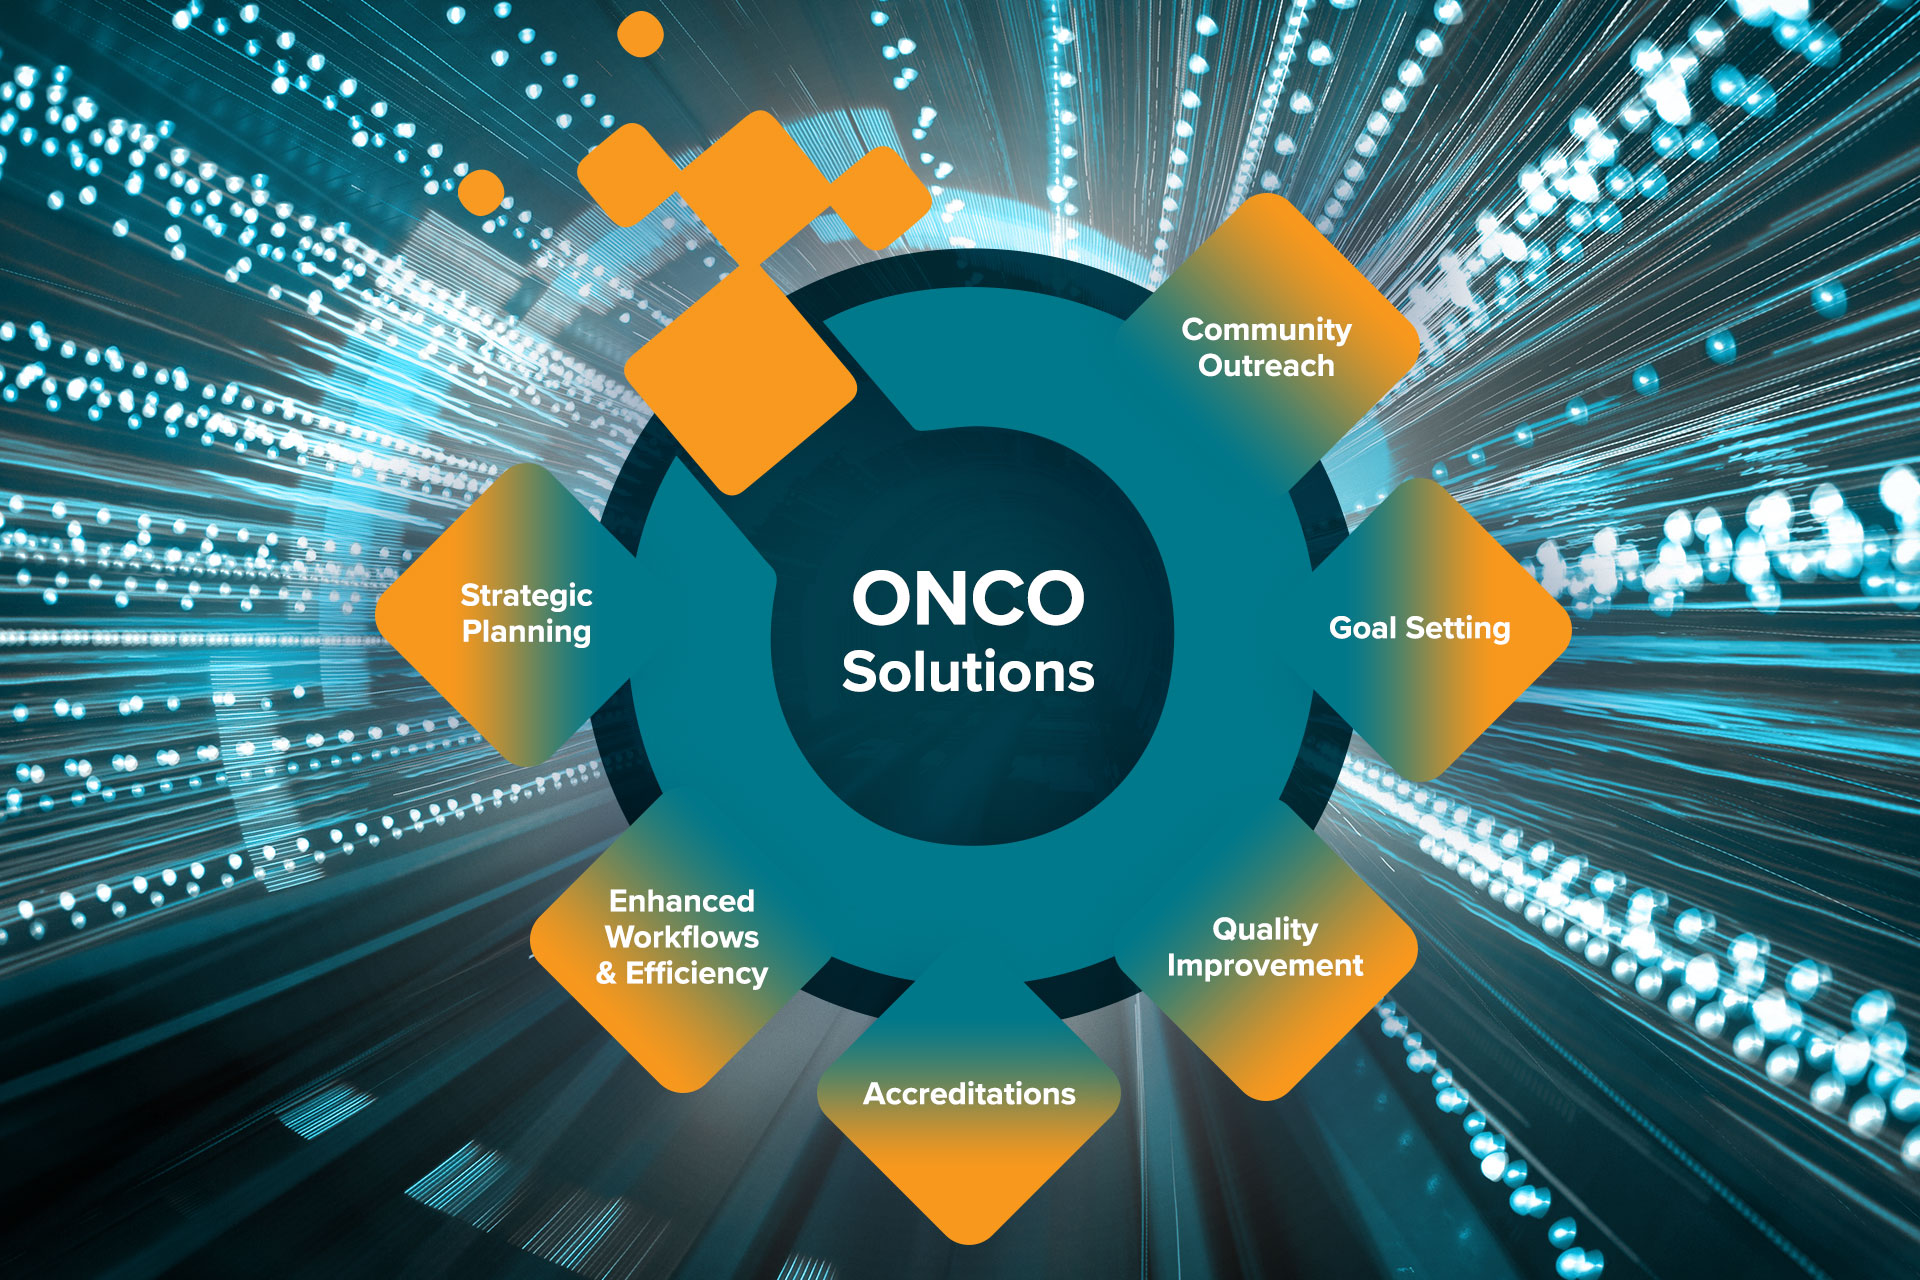 The ONCO Solution Ecosystem